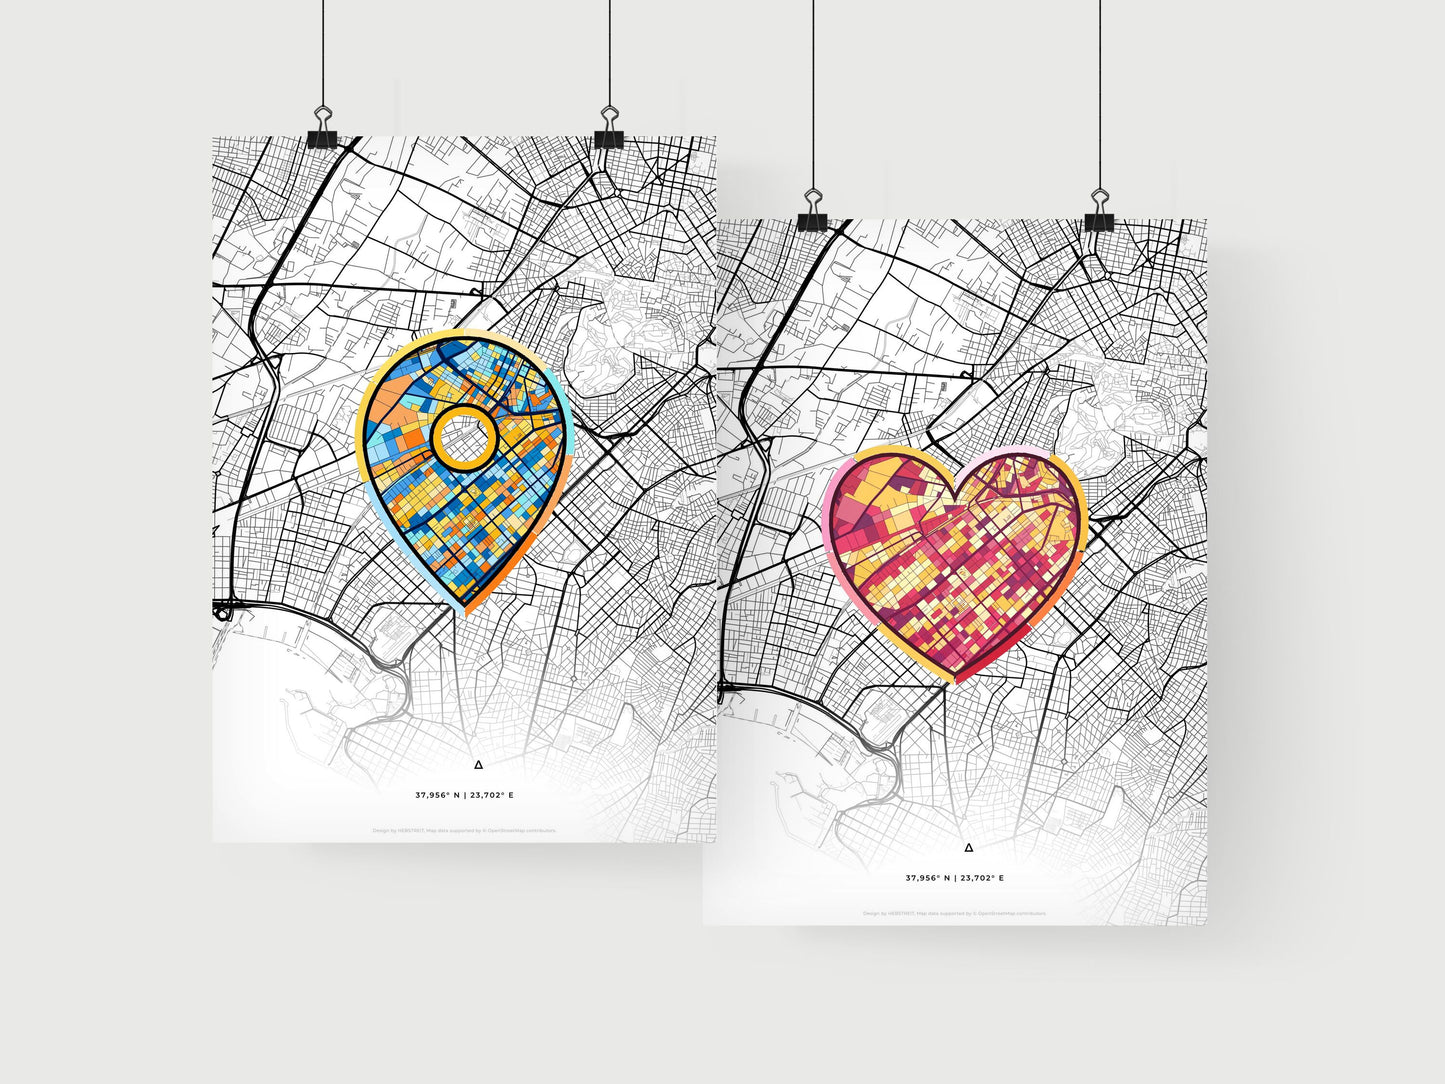 KALLITHEA GREECE minimal art map with a colorful icon. Where it all began, Couple map gift.